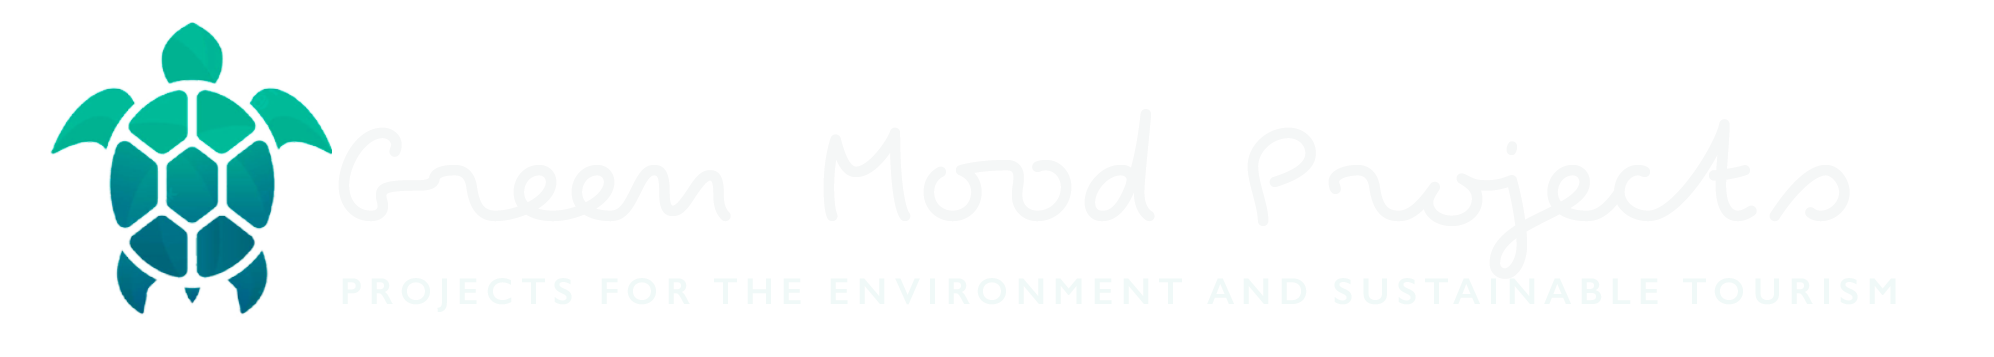 Green Mood Projects